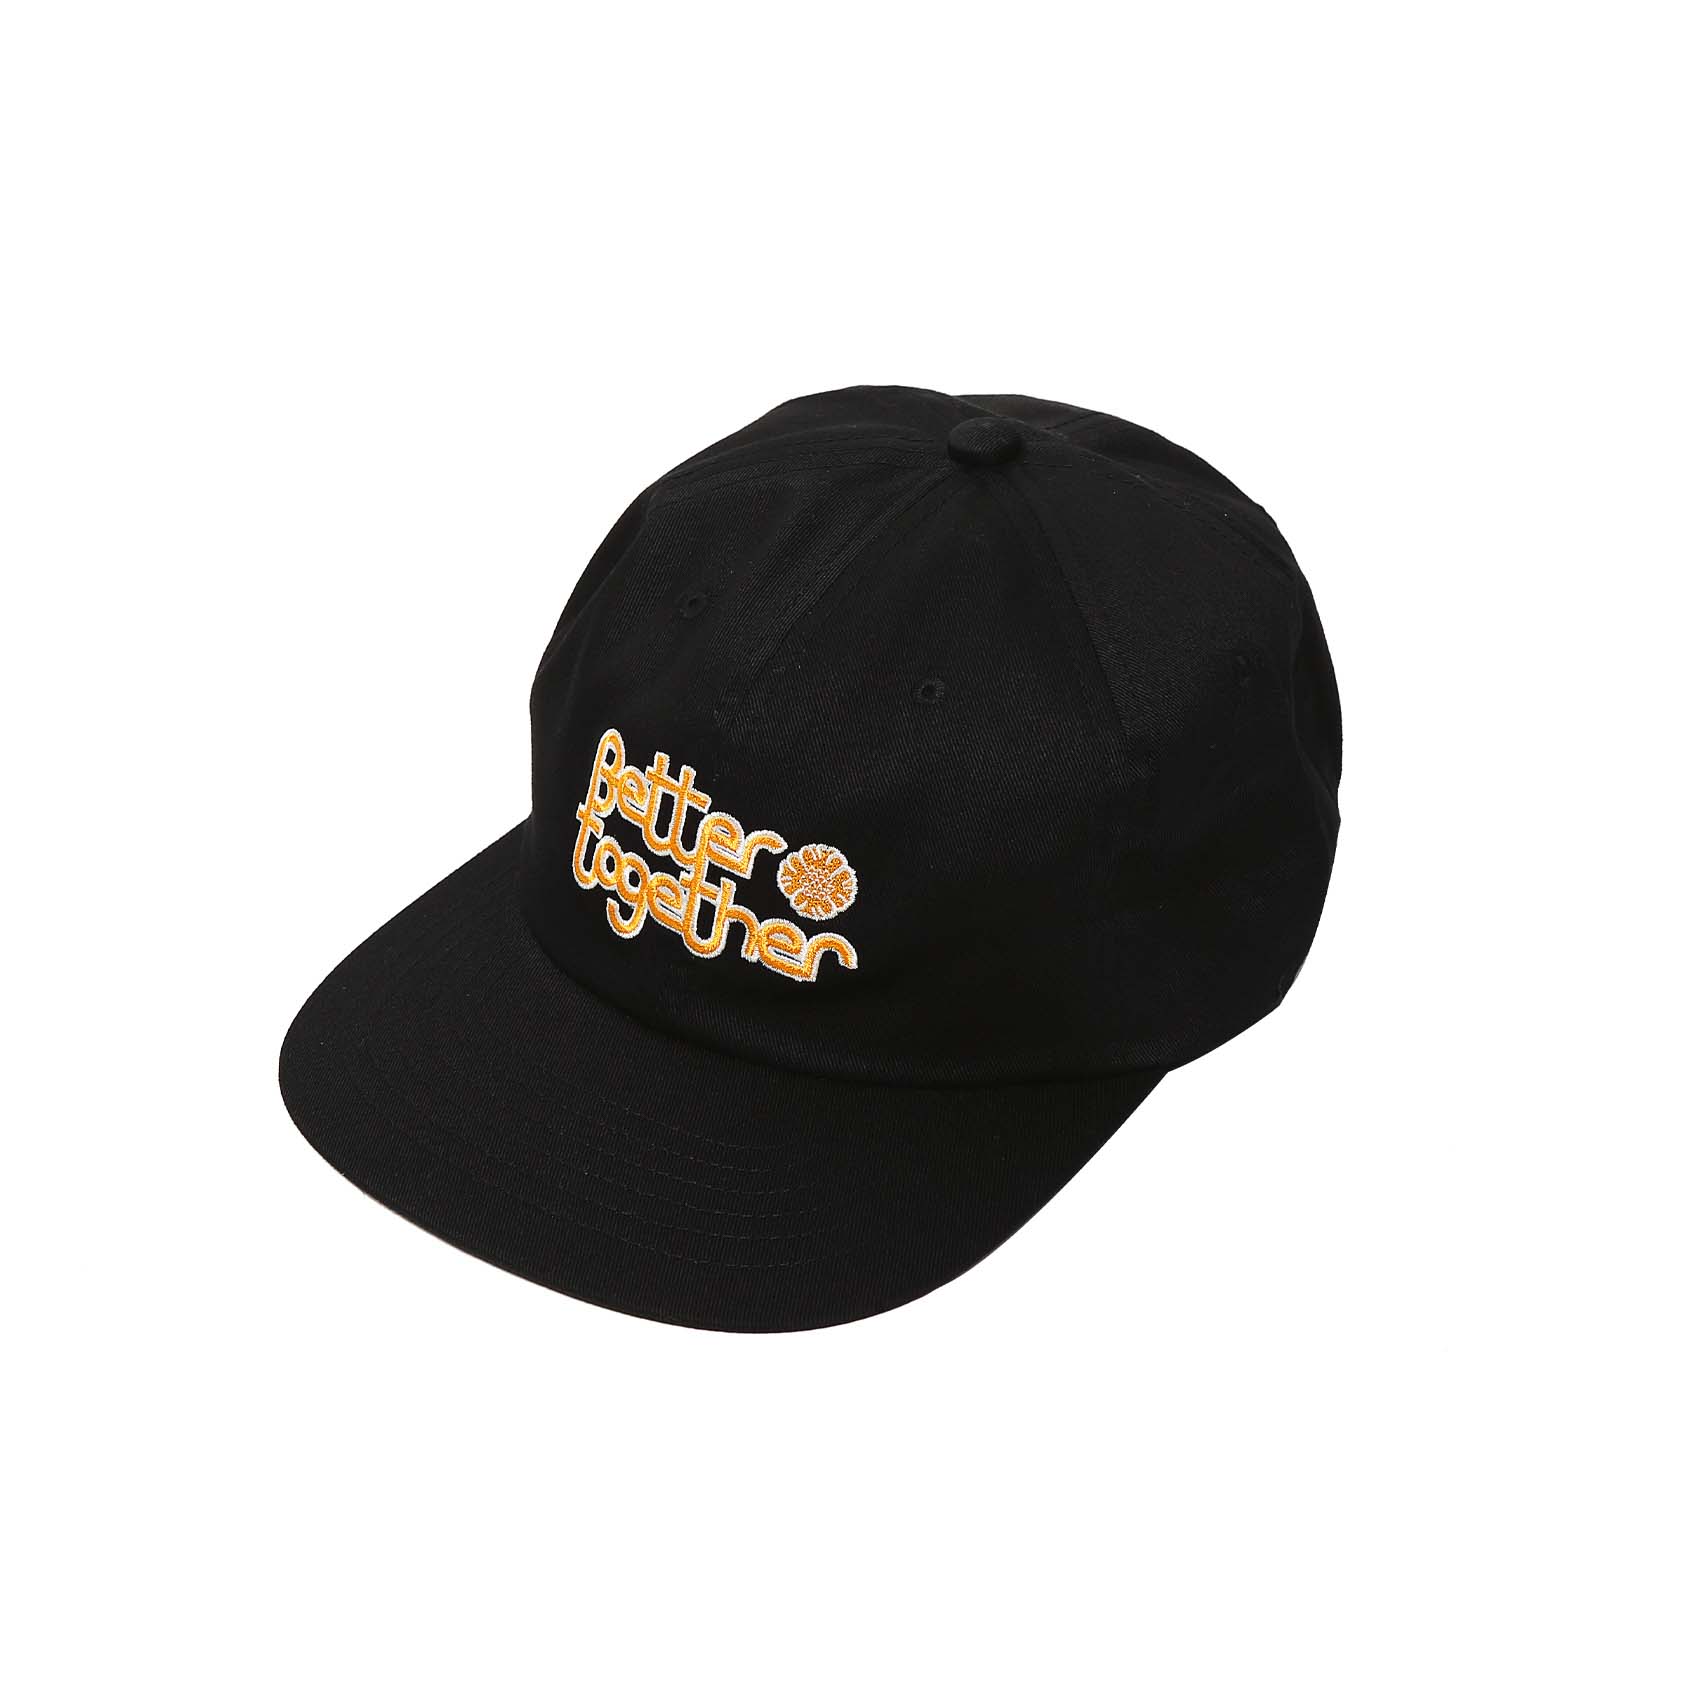 BETTER TOGETHER TWILL CAP - BLACK